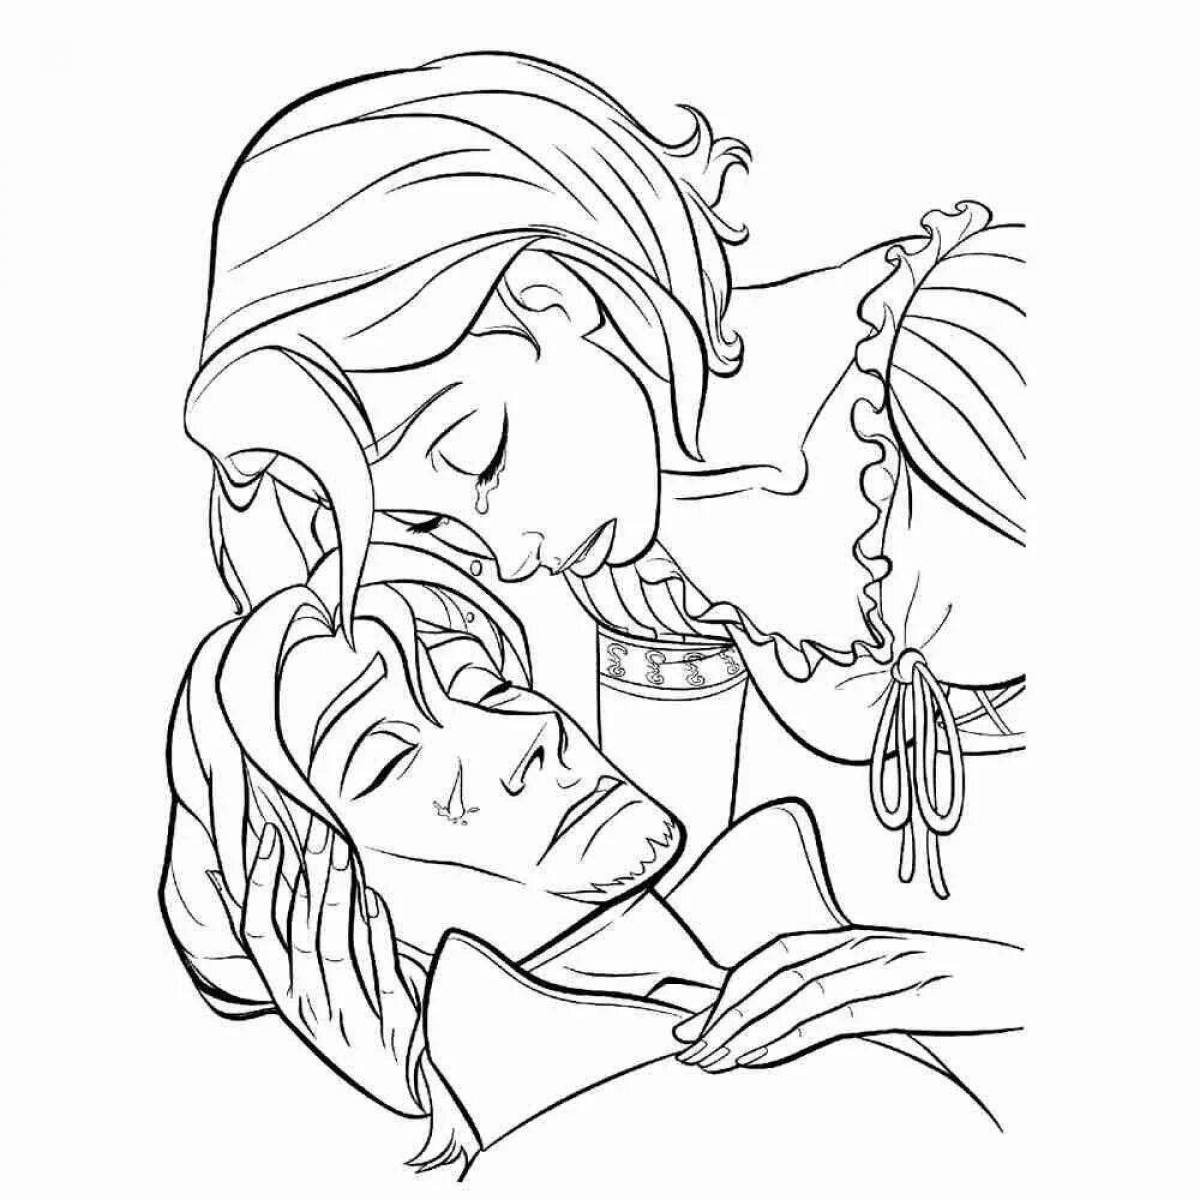 Rapunzel and Eugene coloring book